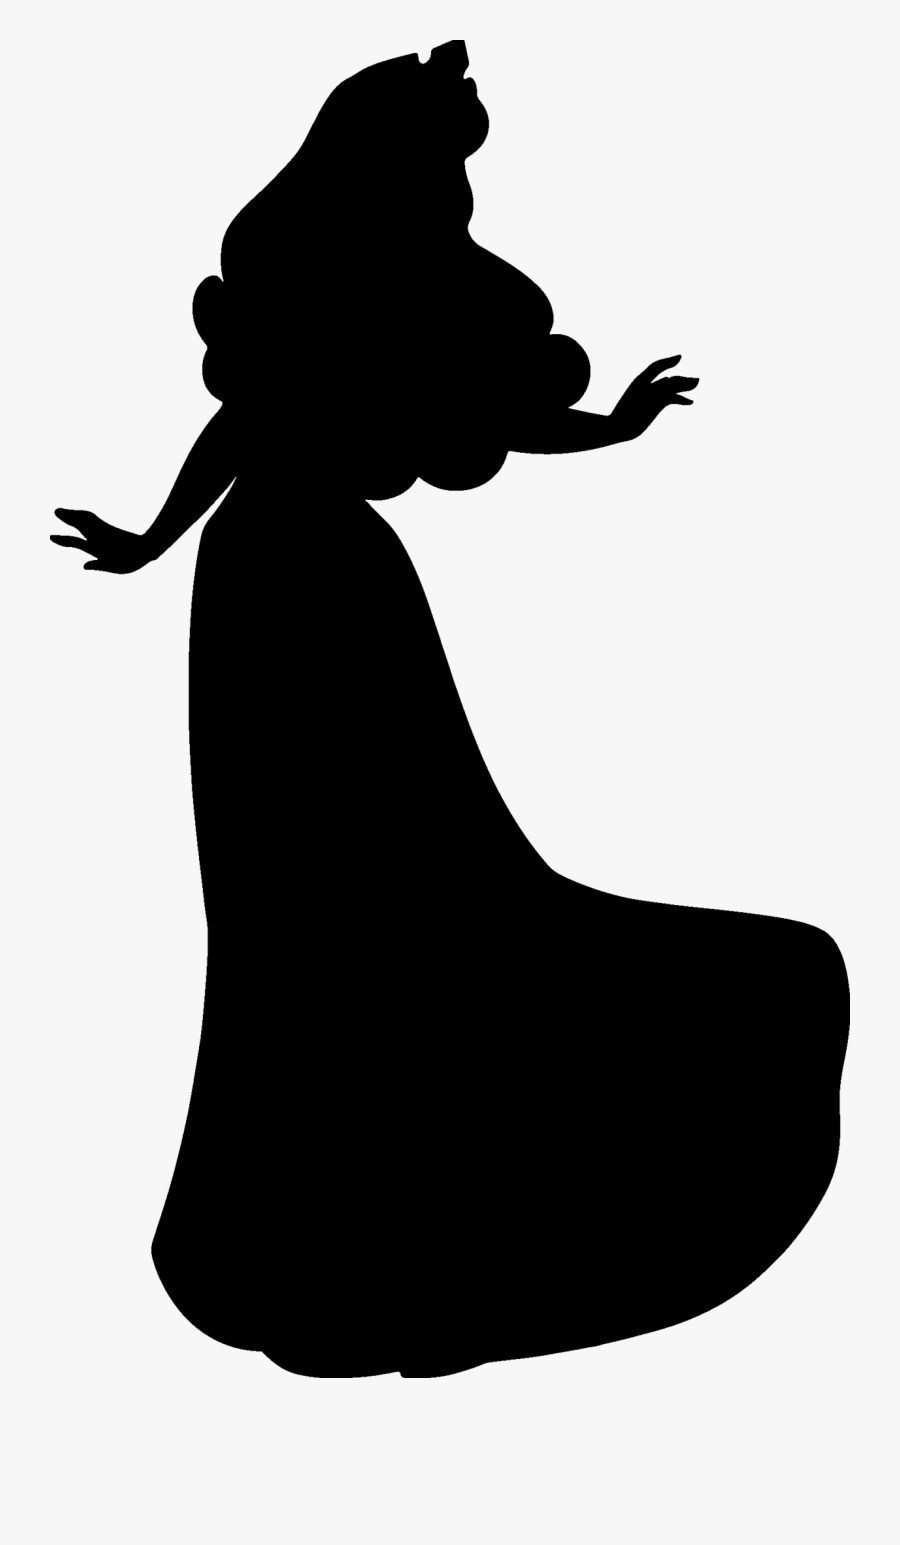 Belle Silhouette Printable At Getdrawings - Disney Princess Silhouette Png, Transparent Clipart